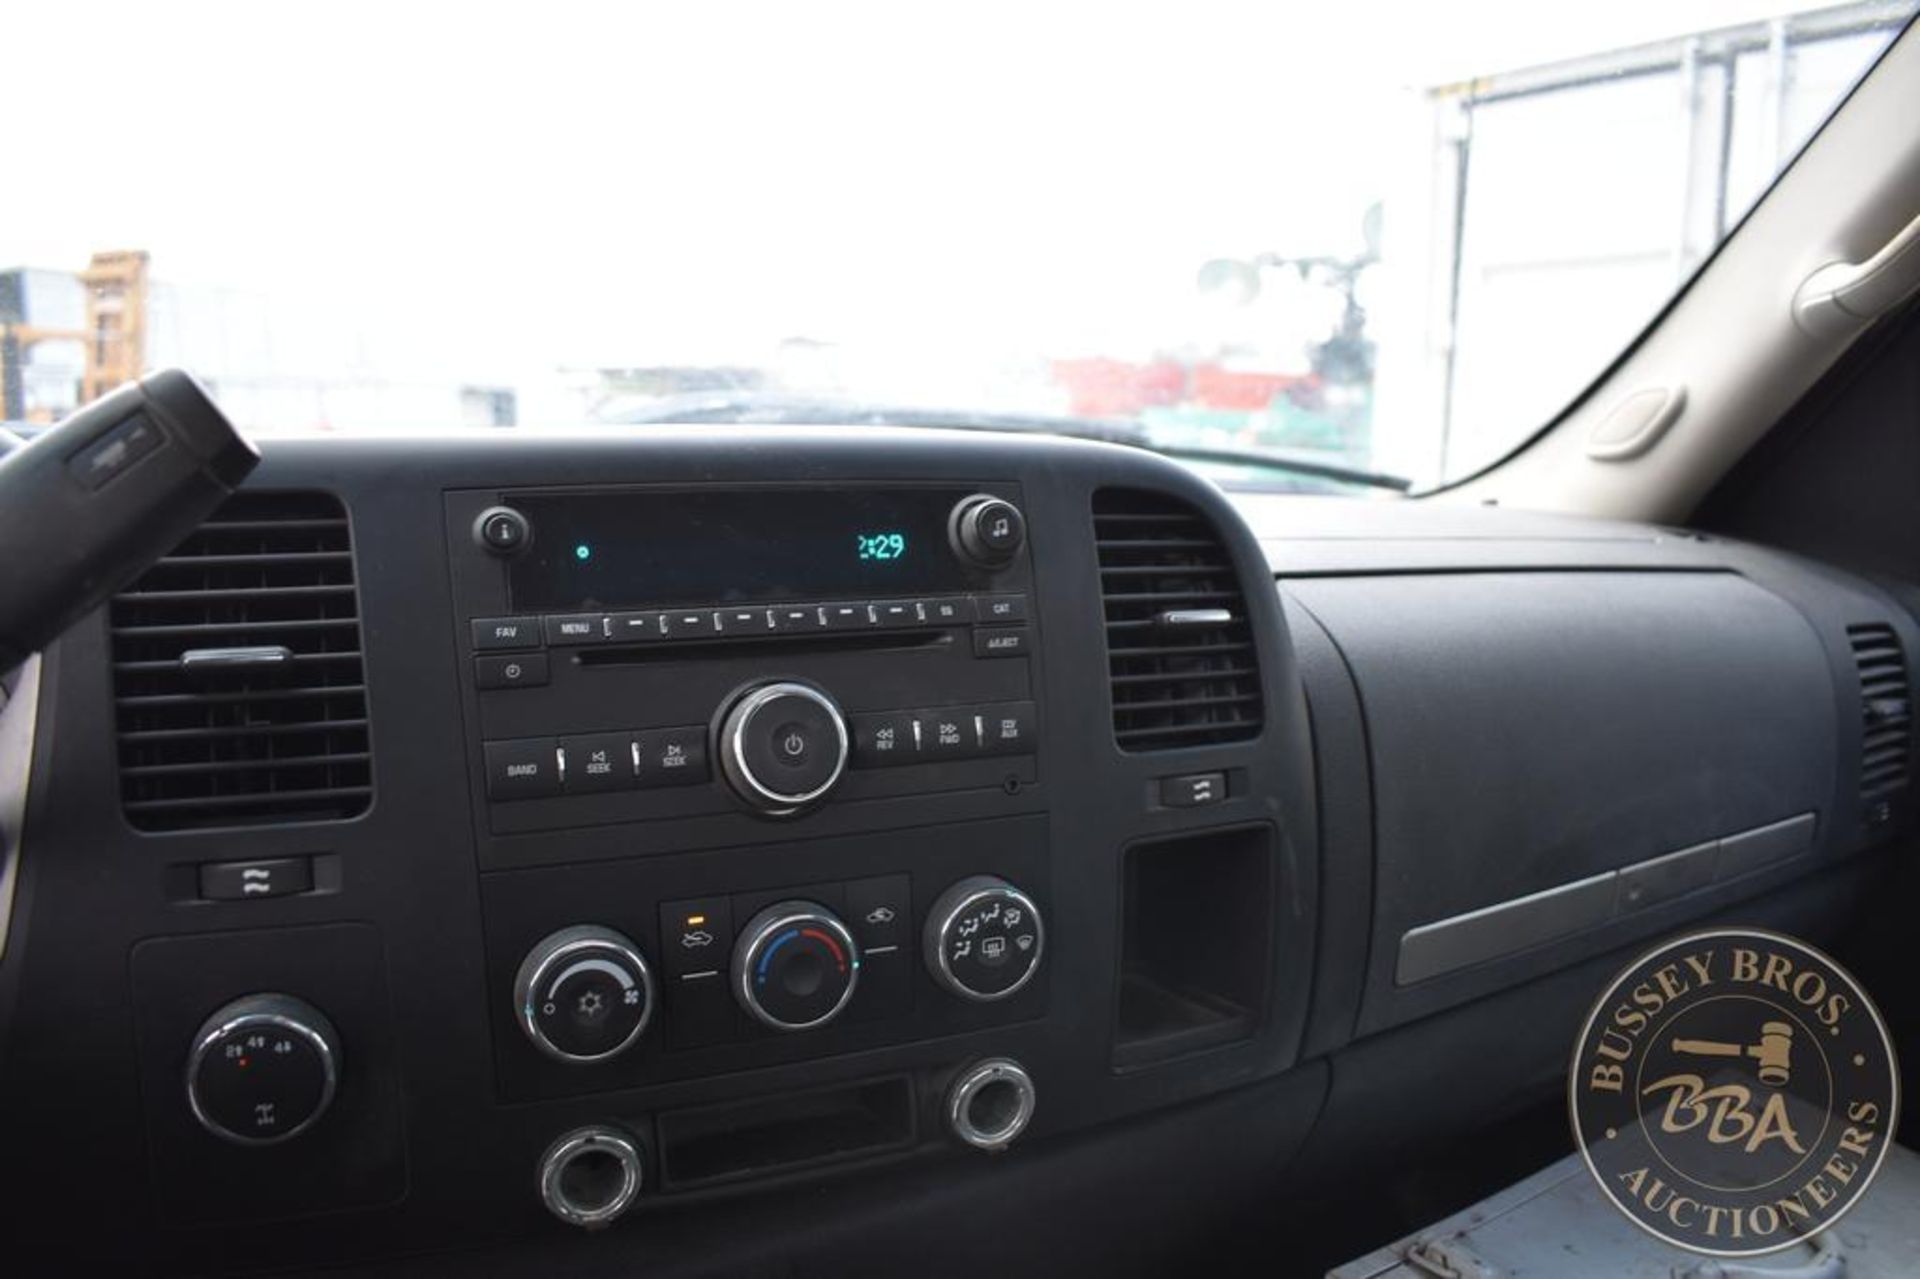 2007 CHEVROLET 2500HD 26012 - Image 39 of 52